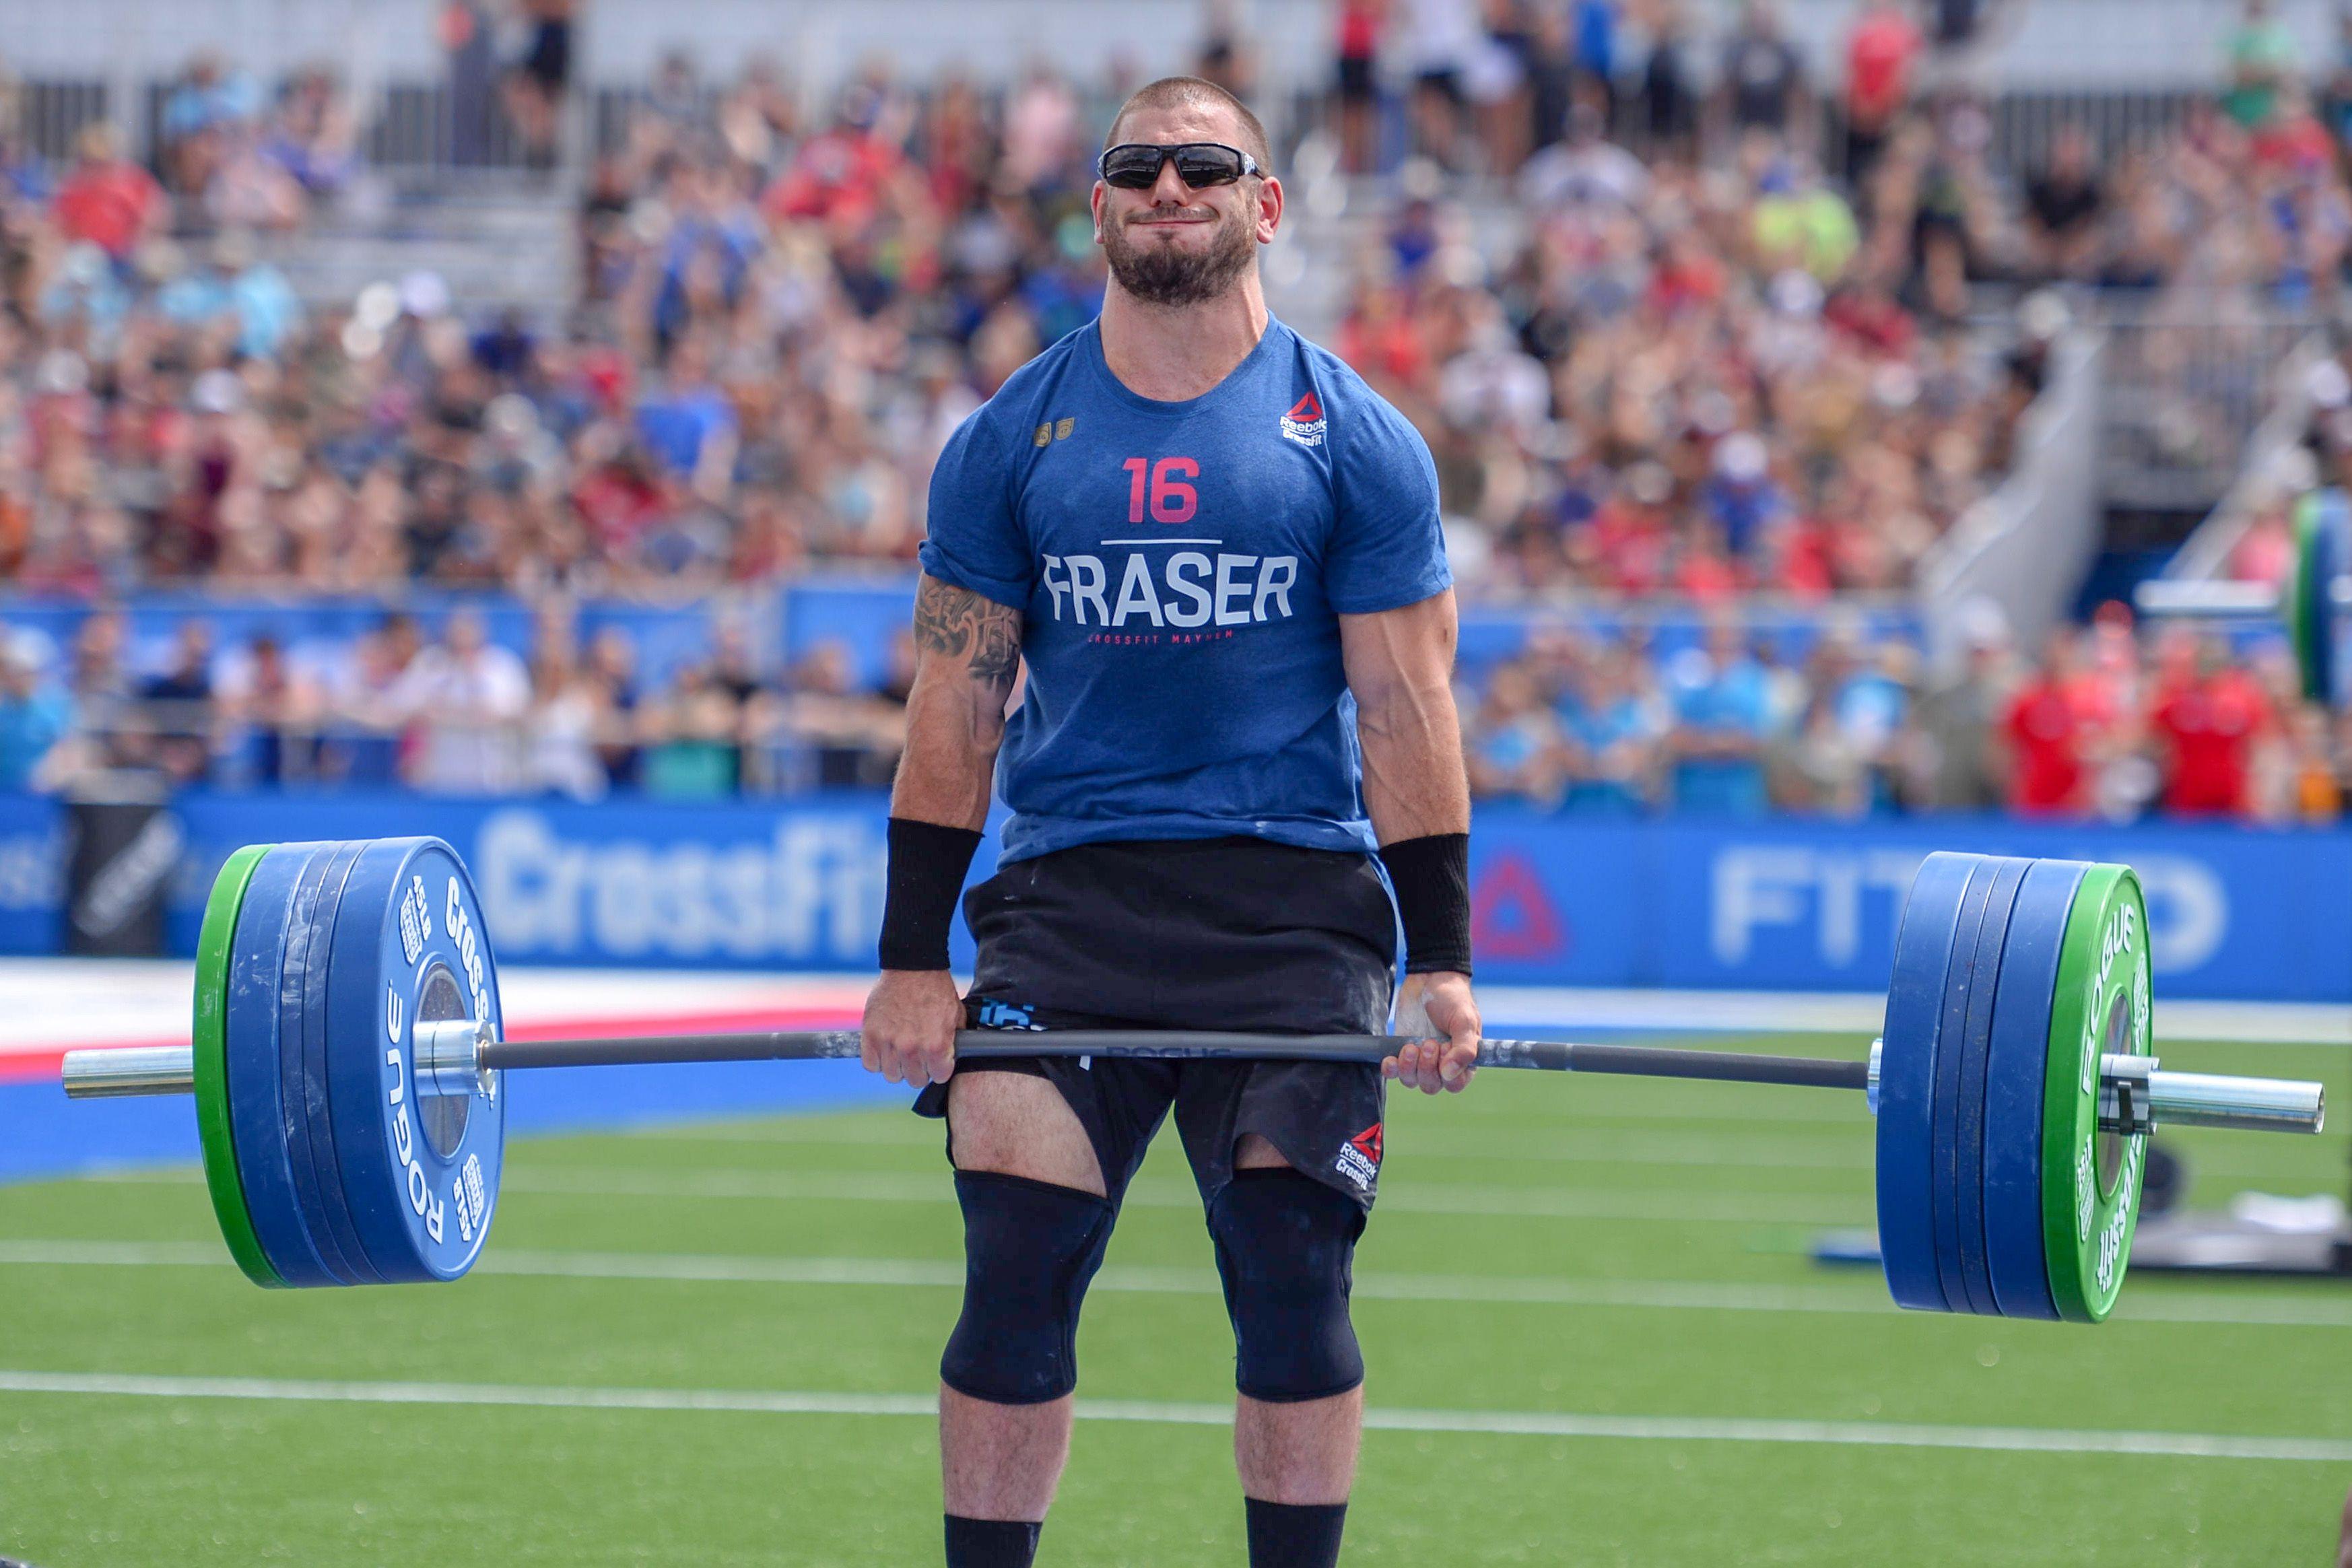 Flipboard: 7 Athletes You Need to Be Following During the CrossFit